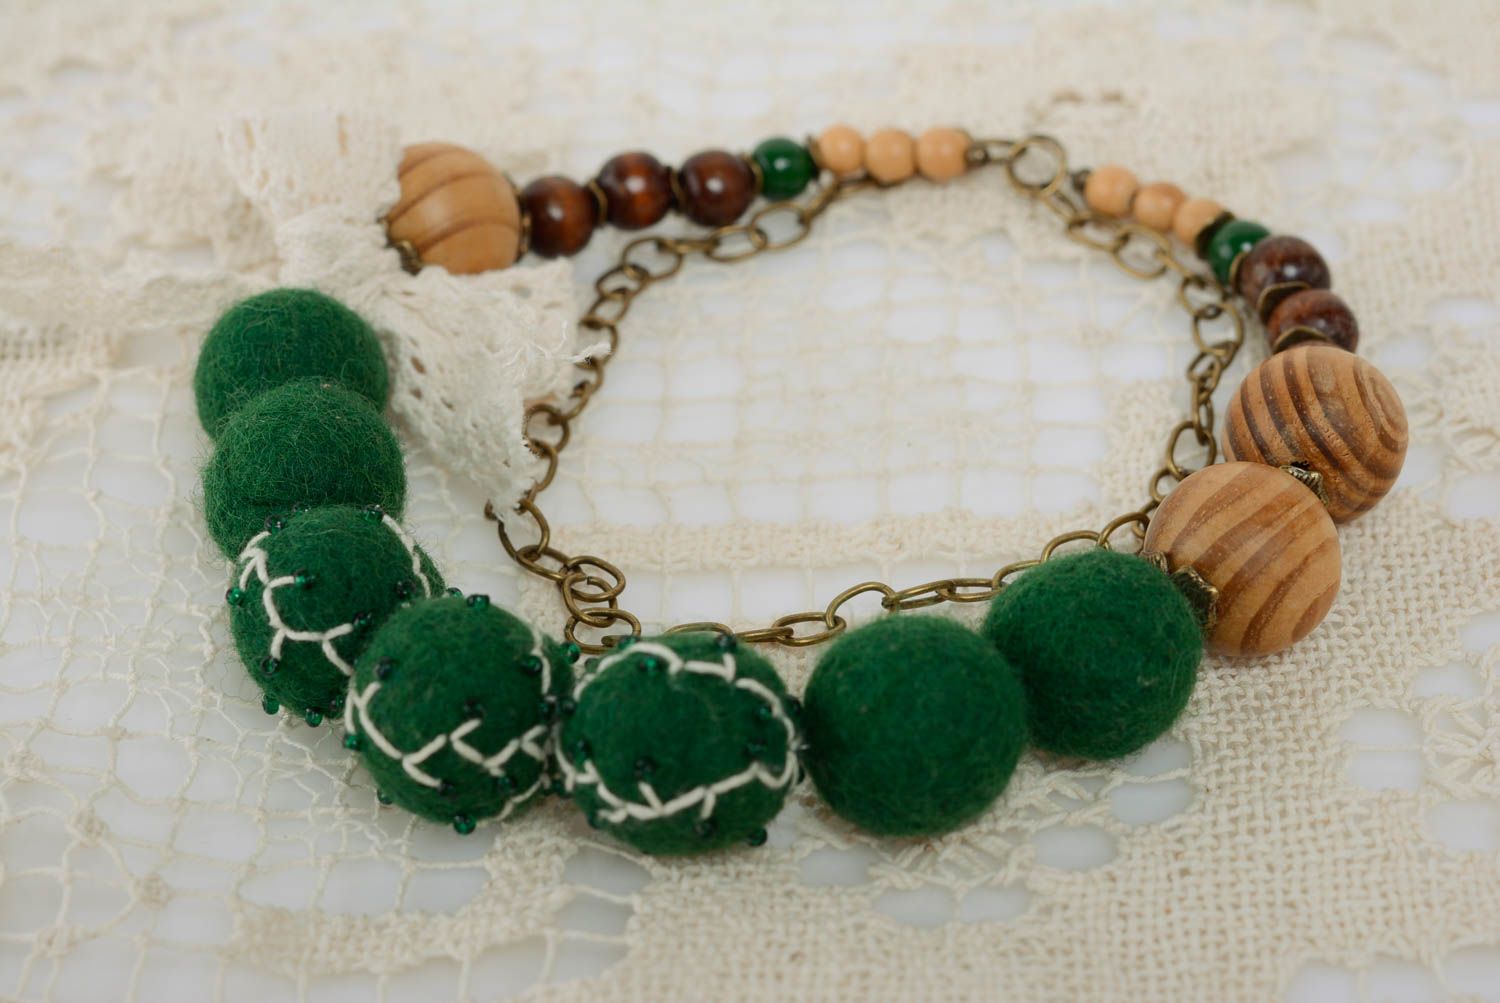 Handmade necklace on chain with green felted wool and wooden beads with lace photo 4